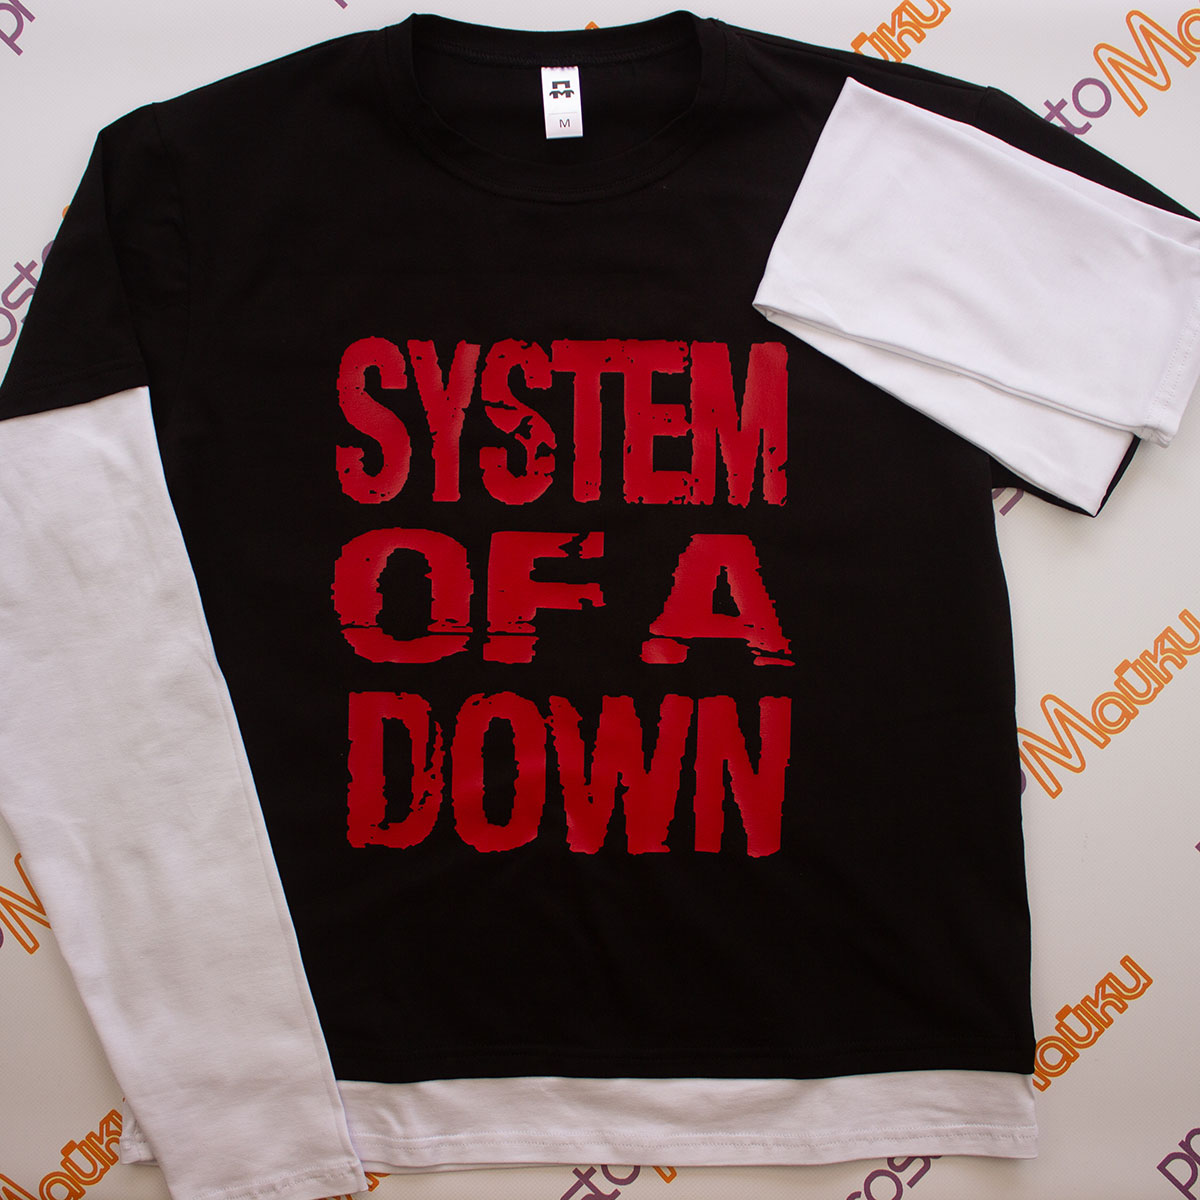 Подушка "System Of A Down"